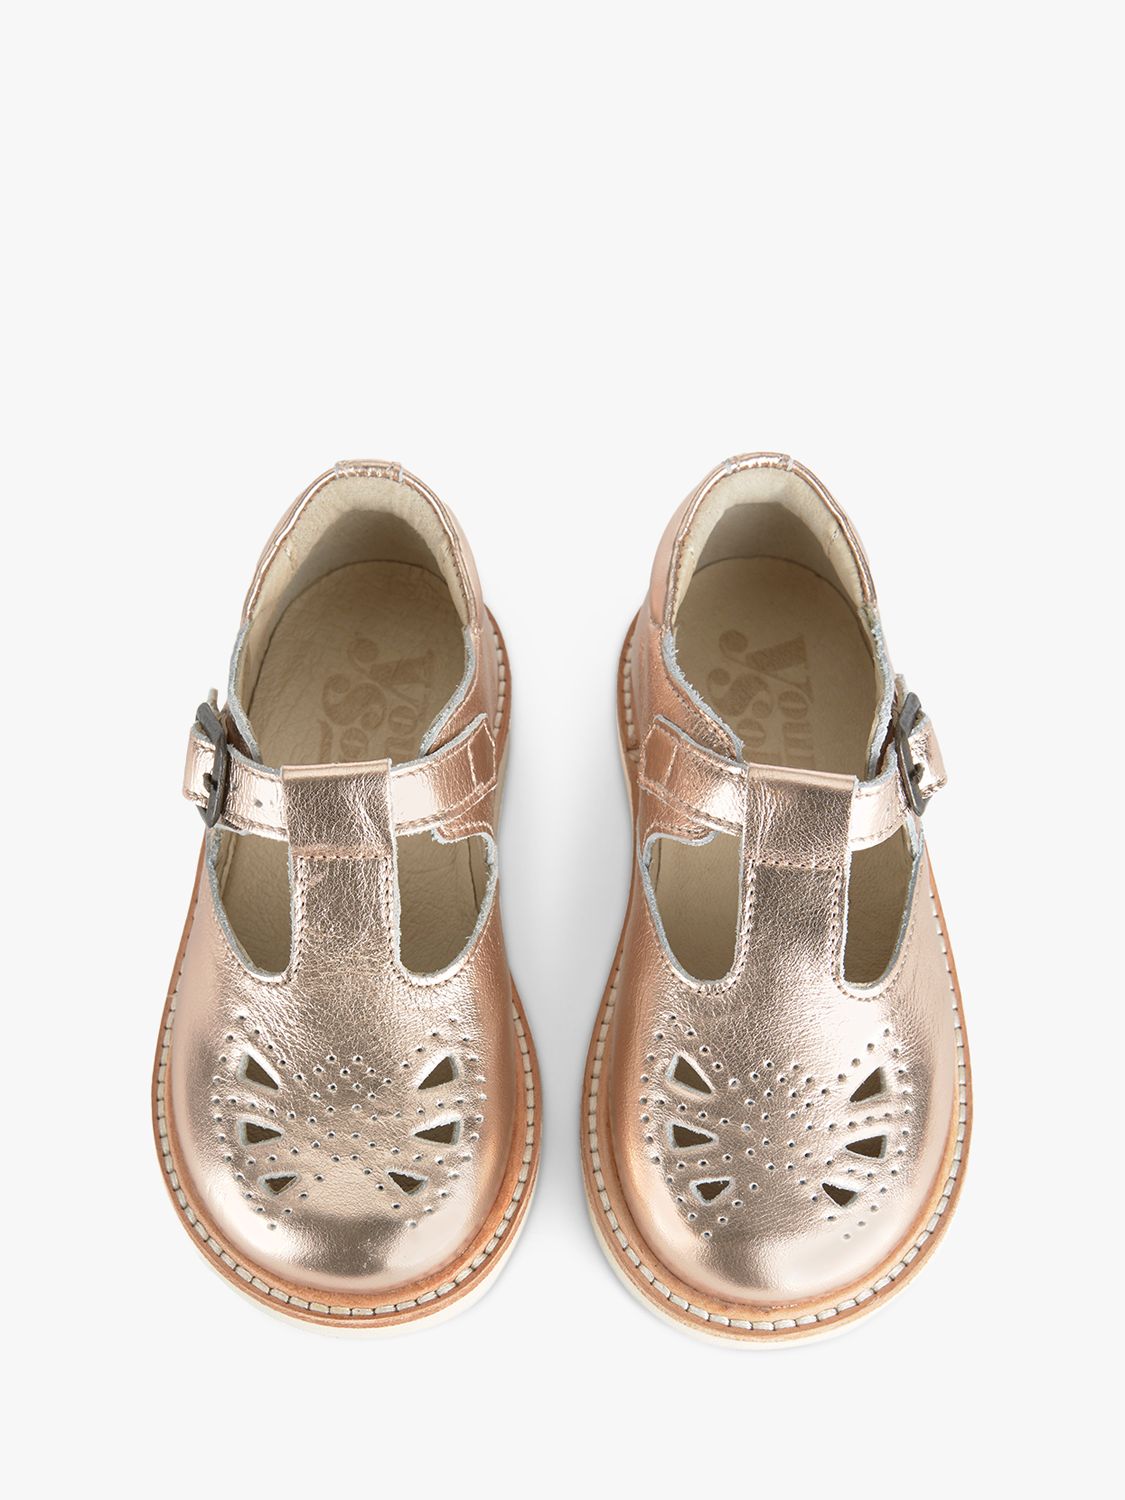 Buy Young Soles Kids' Rosie T-Bar Leather Shoes Online at johnlewis.com